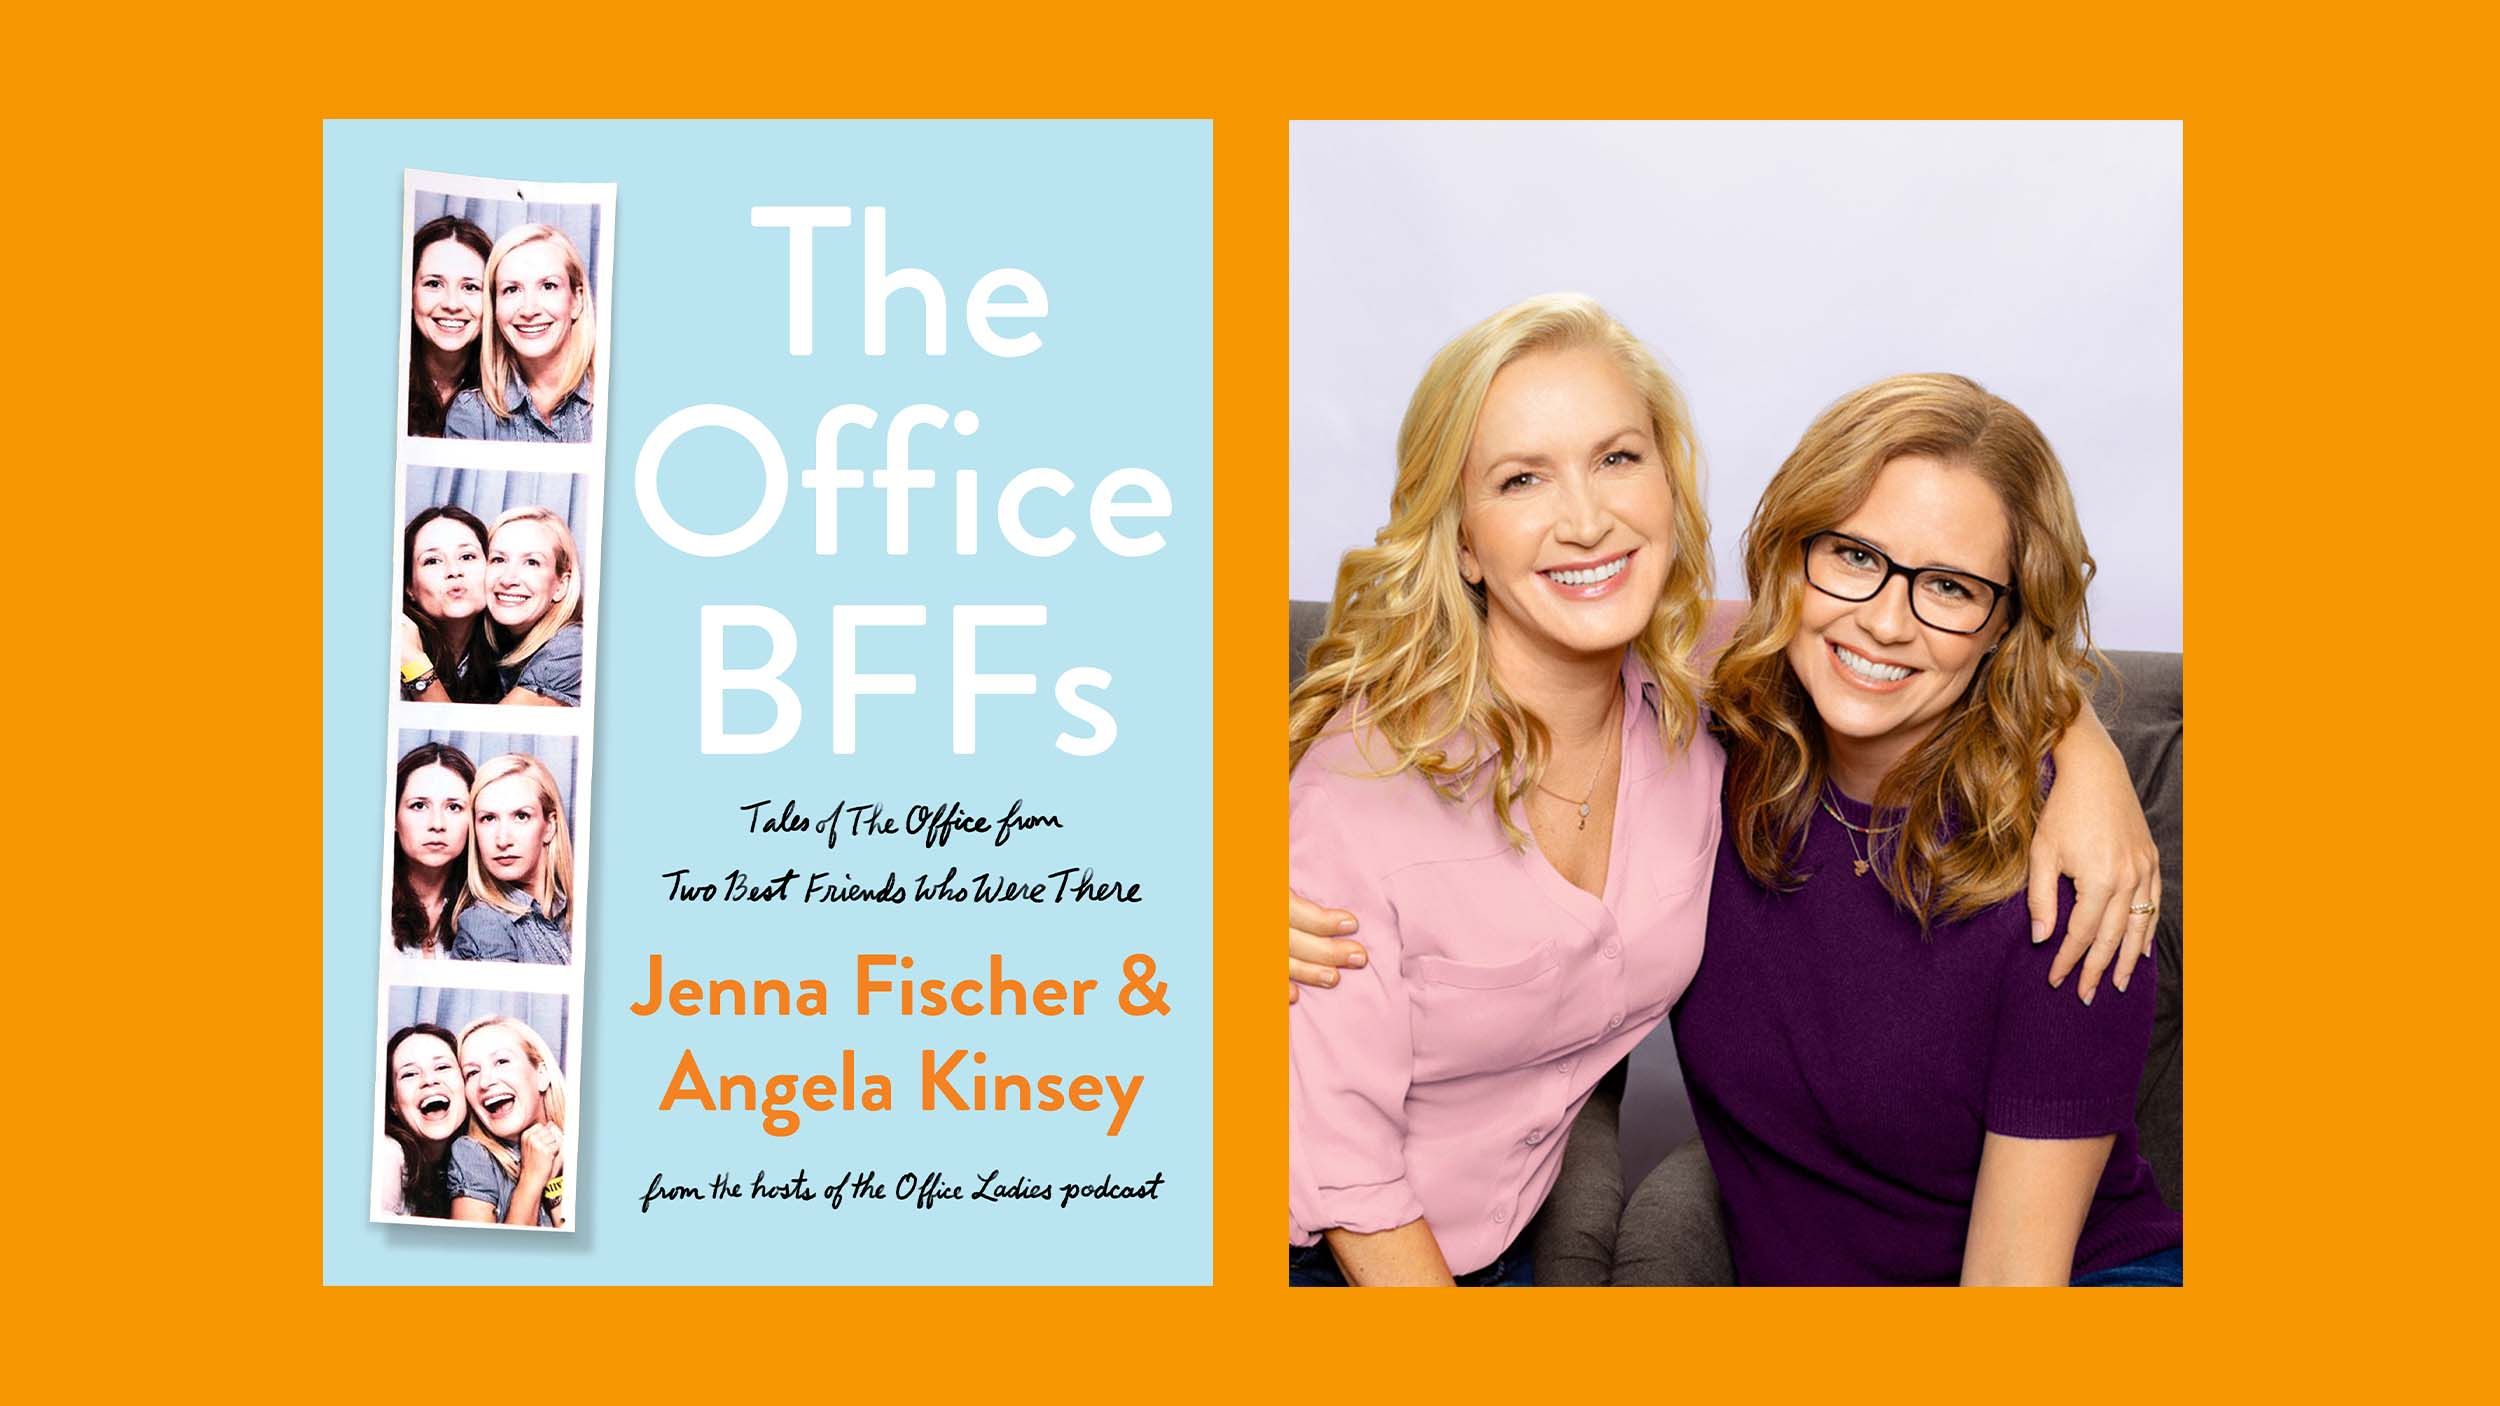 Book Review: The Office BFFs by Jenna Fisher and Angela Kinsey